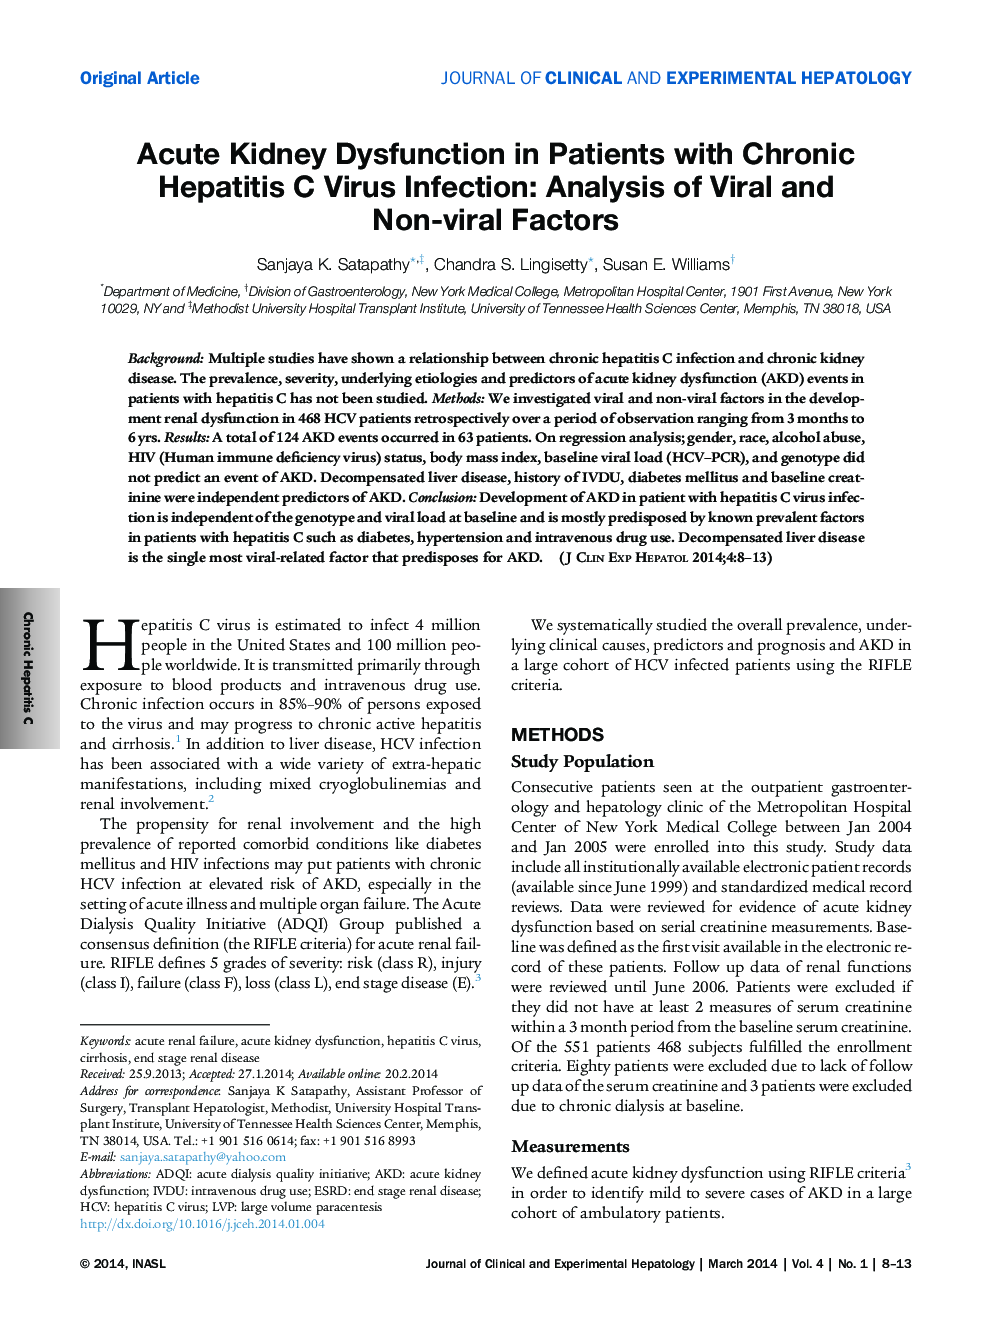 Acute Kidney Dysfunction in Patients with Chronic Hepatitis C Virus Infection: Analysis of Viral and Non-viral Factors